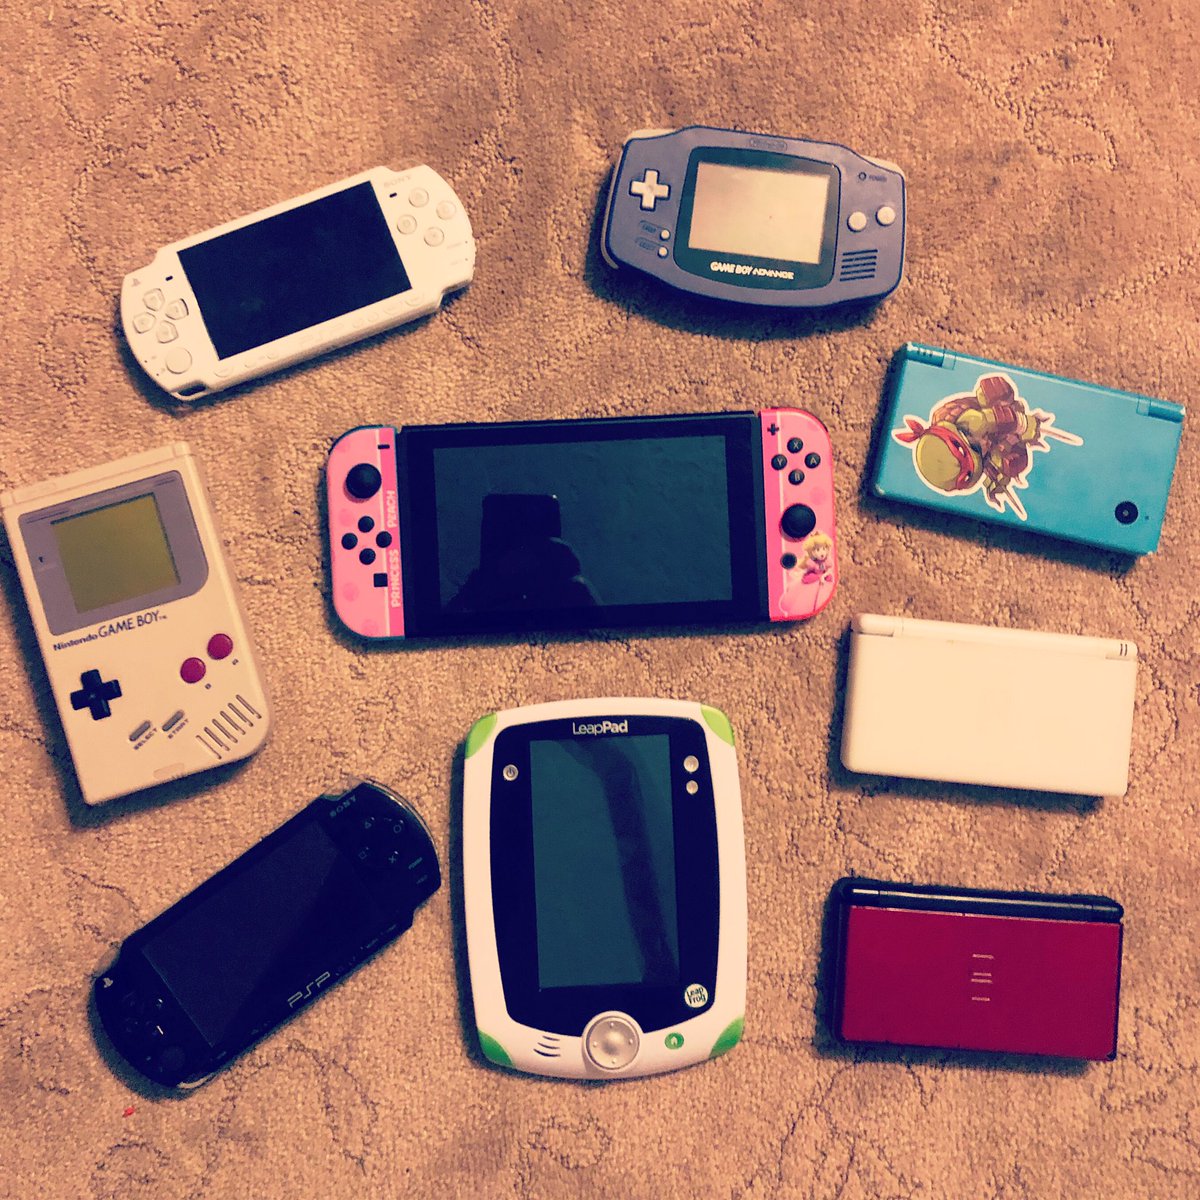 A family that games together stays together 💙🎮💜 #gamingfam #retrogame #psp #gba #gameboy #leappad #twitchgirls #gaminggirls #twitchaffiliate #twitch #dsi #dslites #handheldgames #switch #peaches #grablifebythecontroller #producerpeaches #lovemylife #roadtrip2019